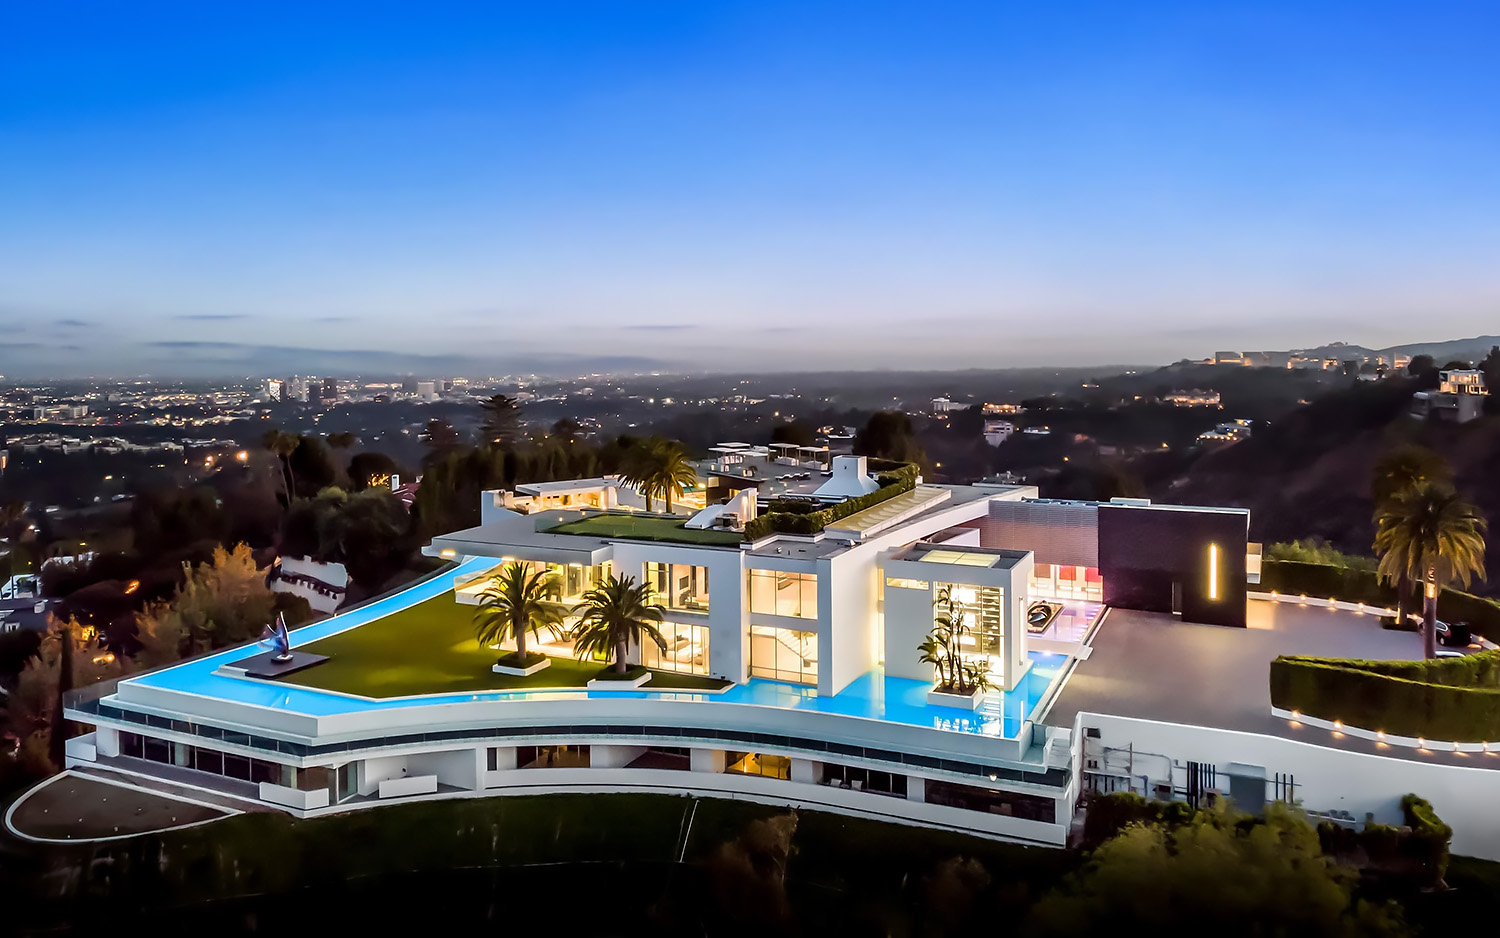 The One Bel Air Estate